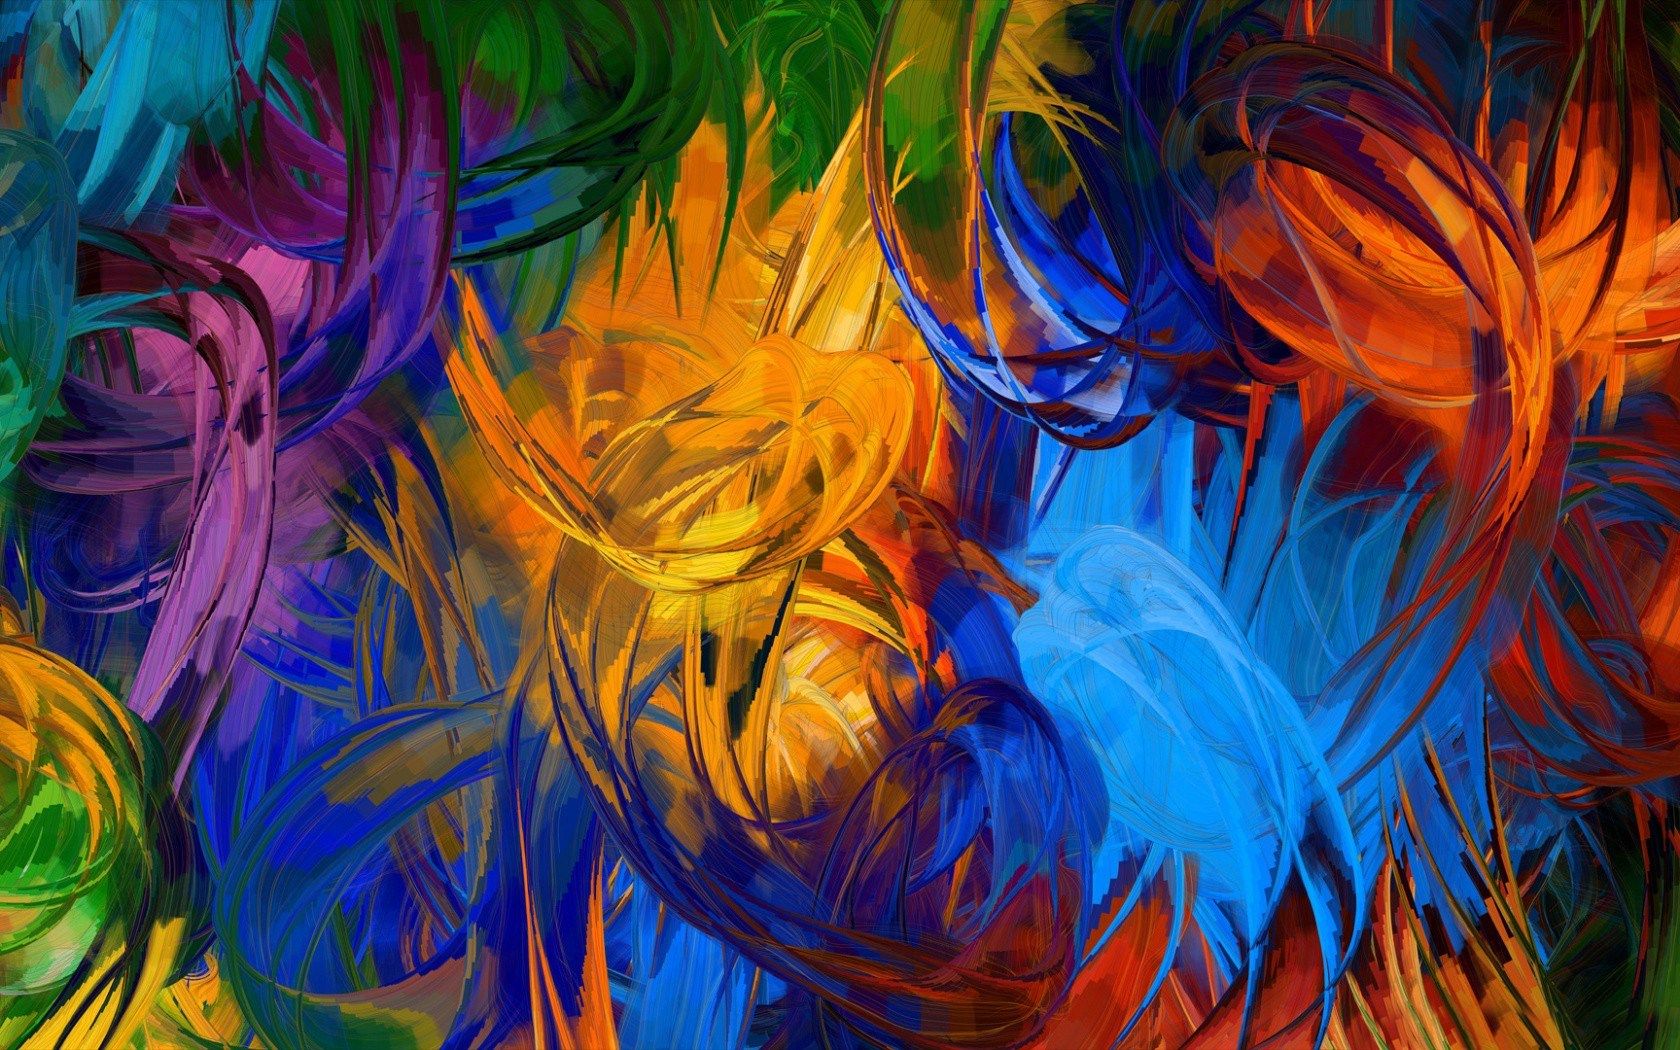 Abstract Paintings Art - wallpaper.